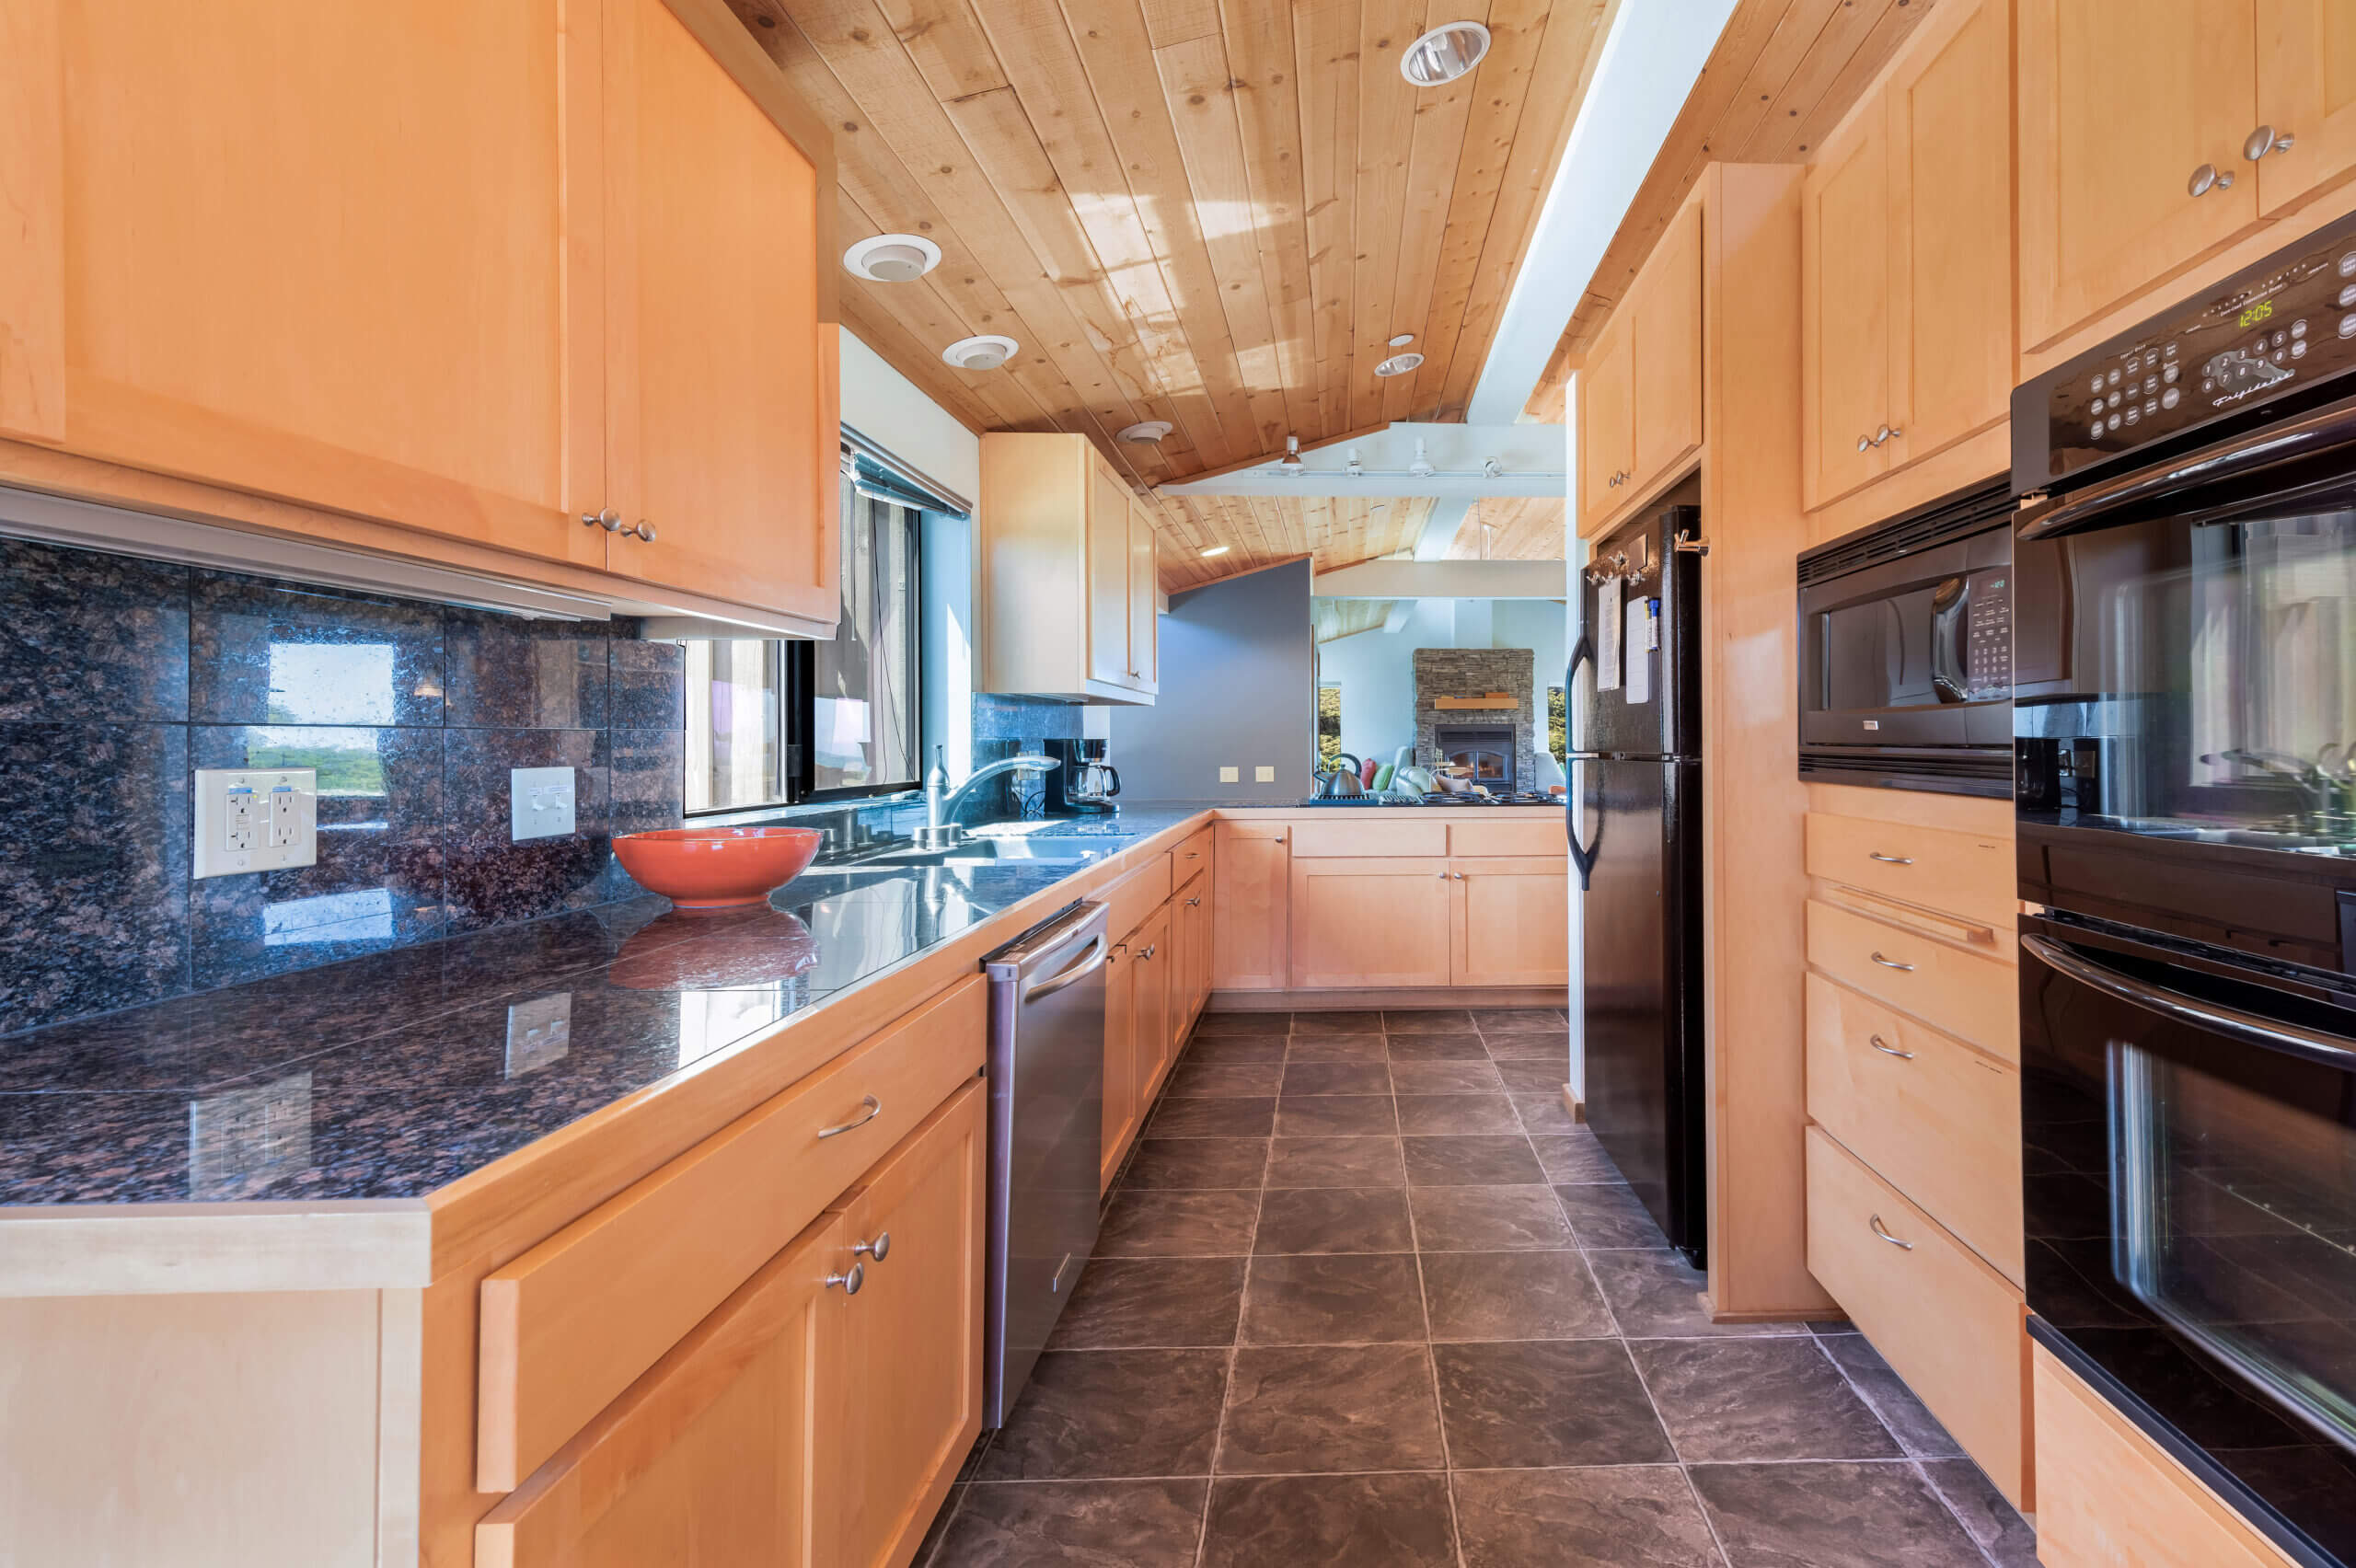 Bella Luna kitchen with marble floors and wood ceiling